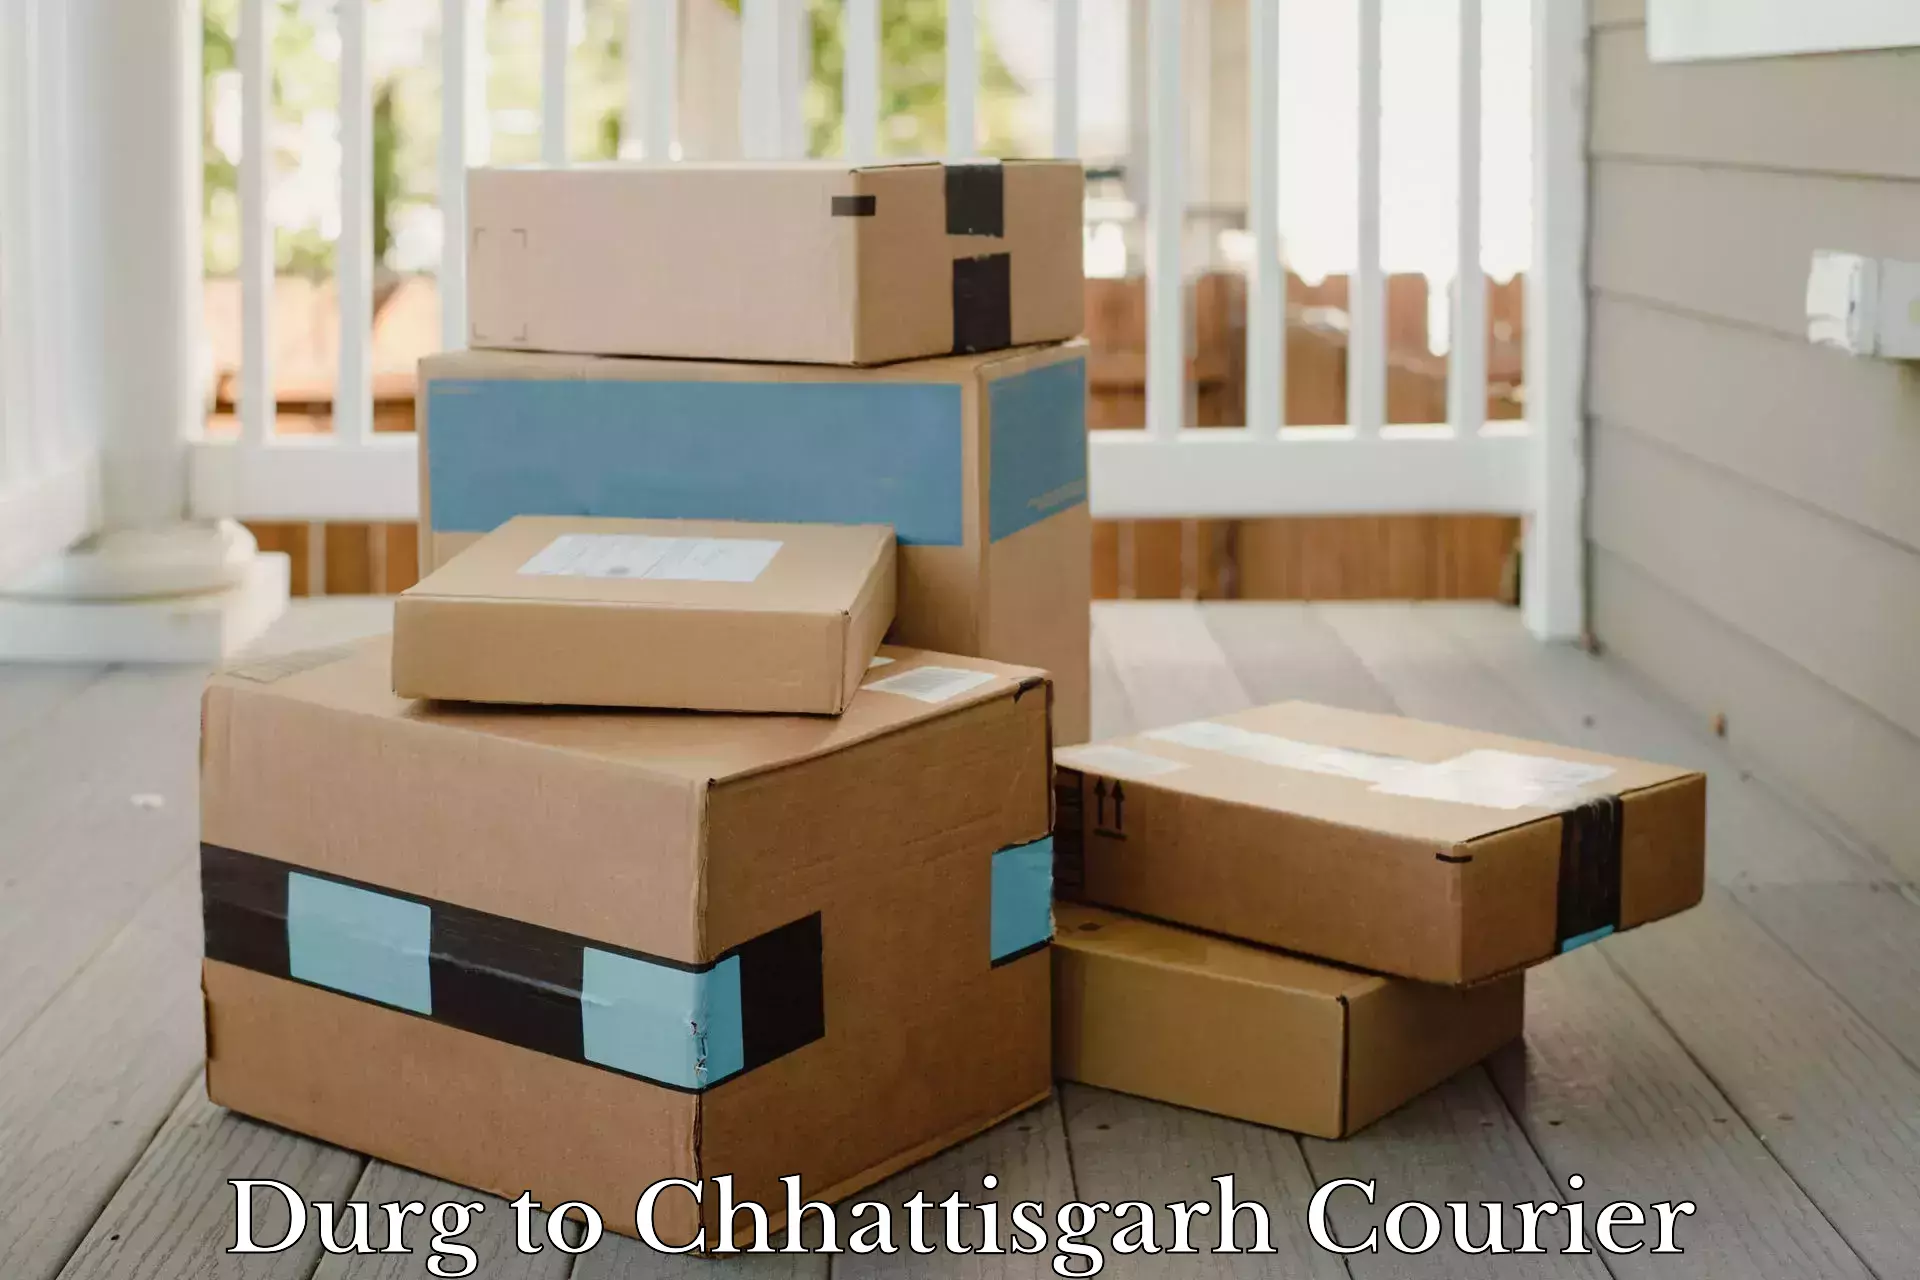 State-of-the-art courier technology Durg to Chhattisgarh